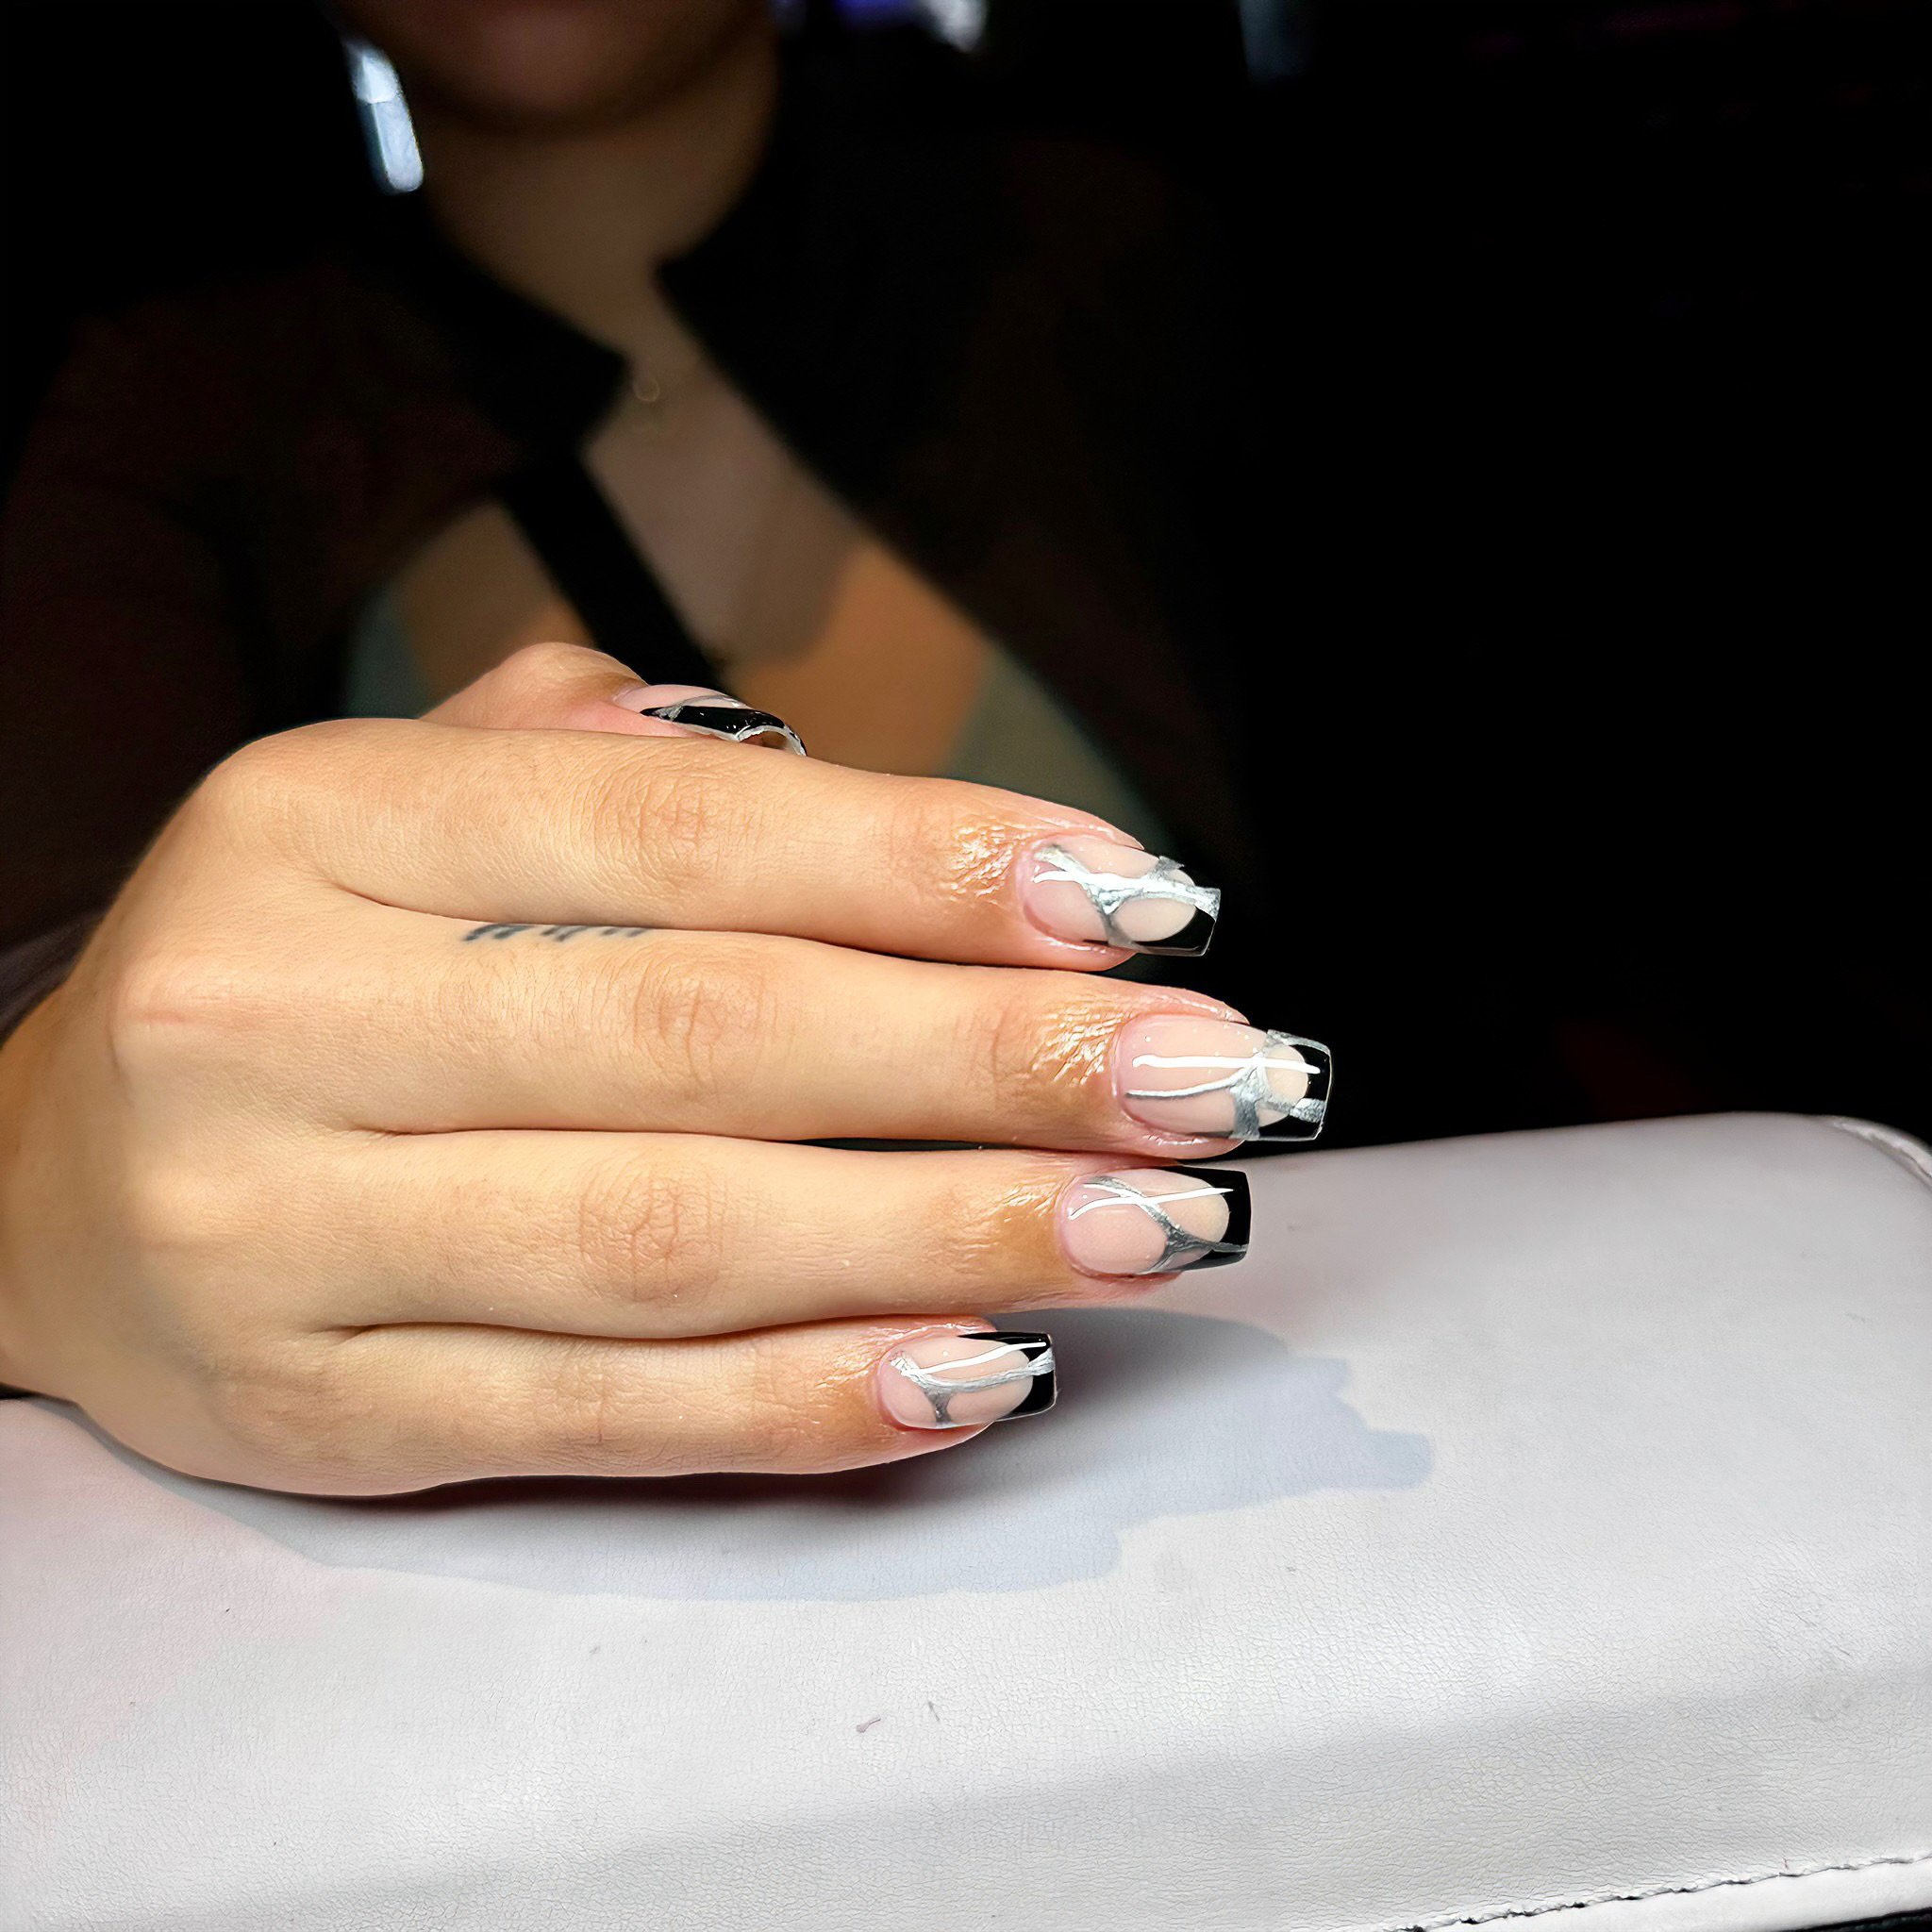 French Tip ✅
Creativity ✅

Elegance with an edge! ⚡💅 Ashley&rsquo;s creative French tip marries sophistication and boldness, featuring sleek black tips accented by shimmering silver lines. Let your nails make a statement at Bliss Nails &amp; Spa. 

